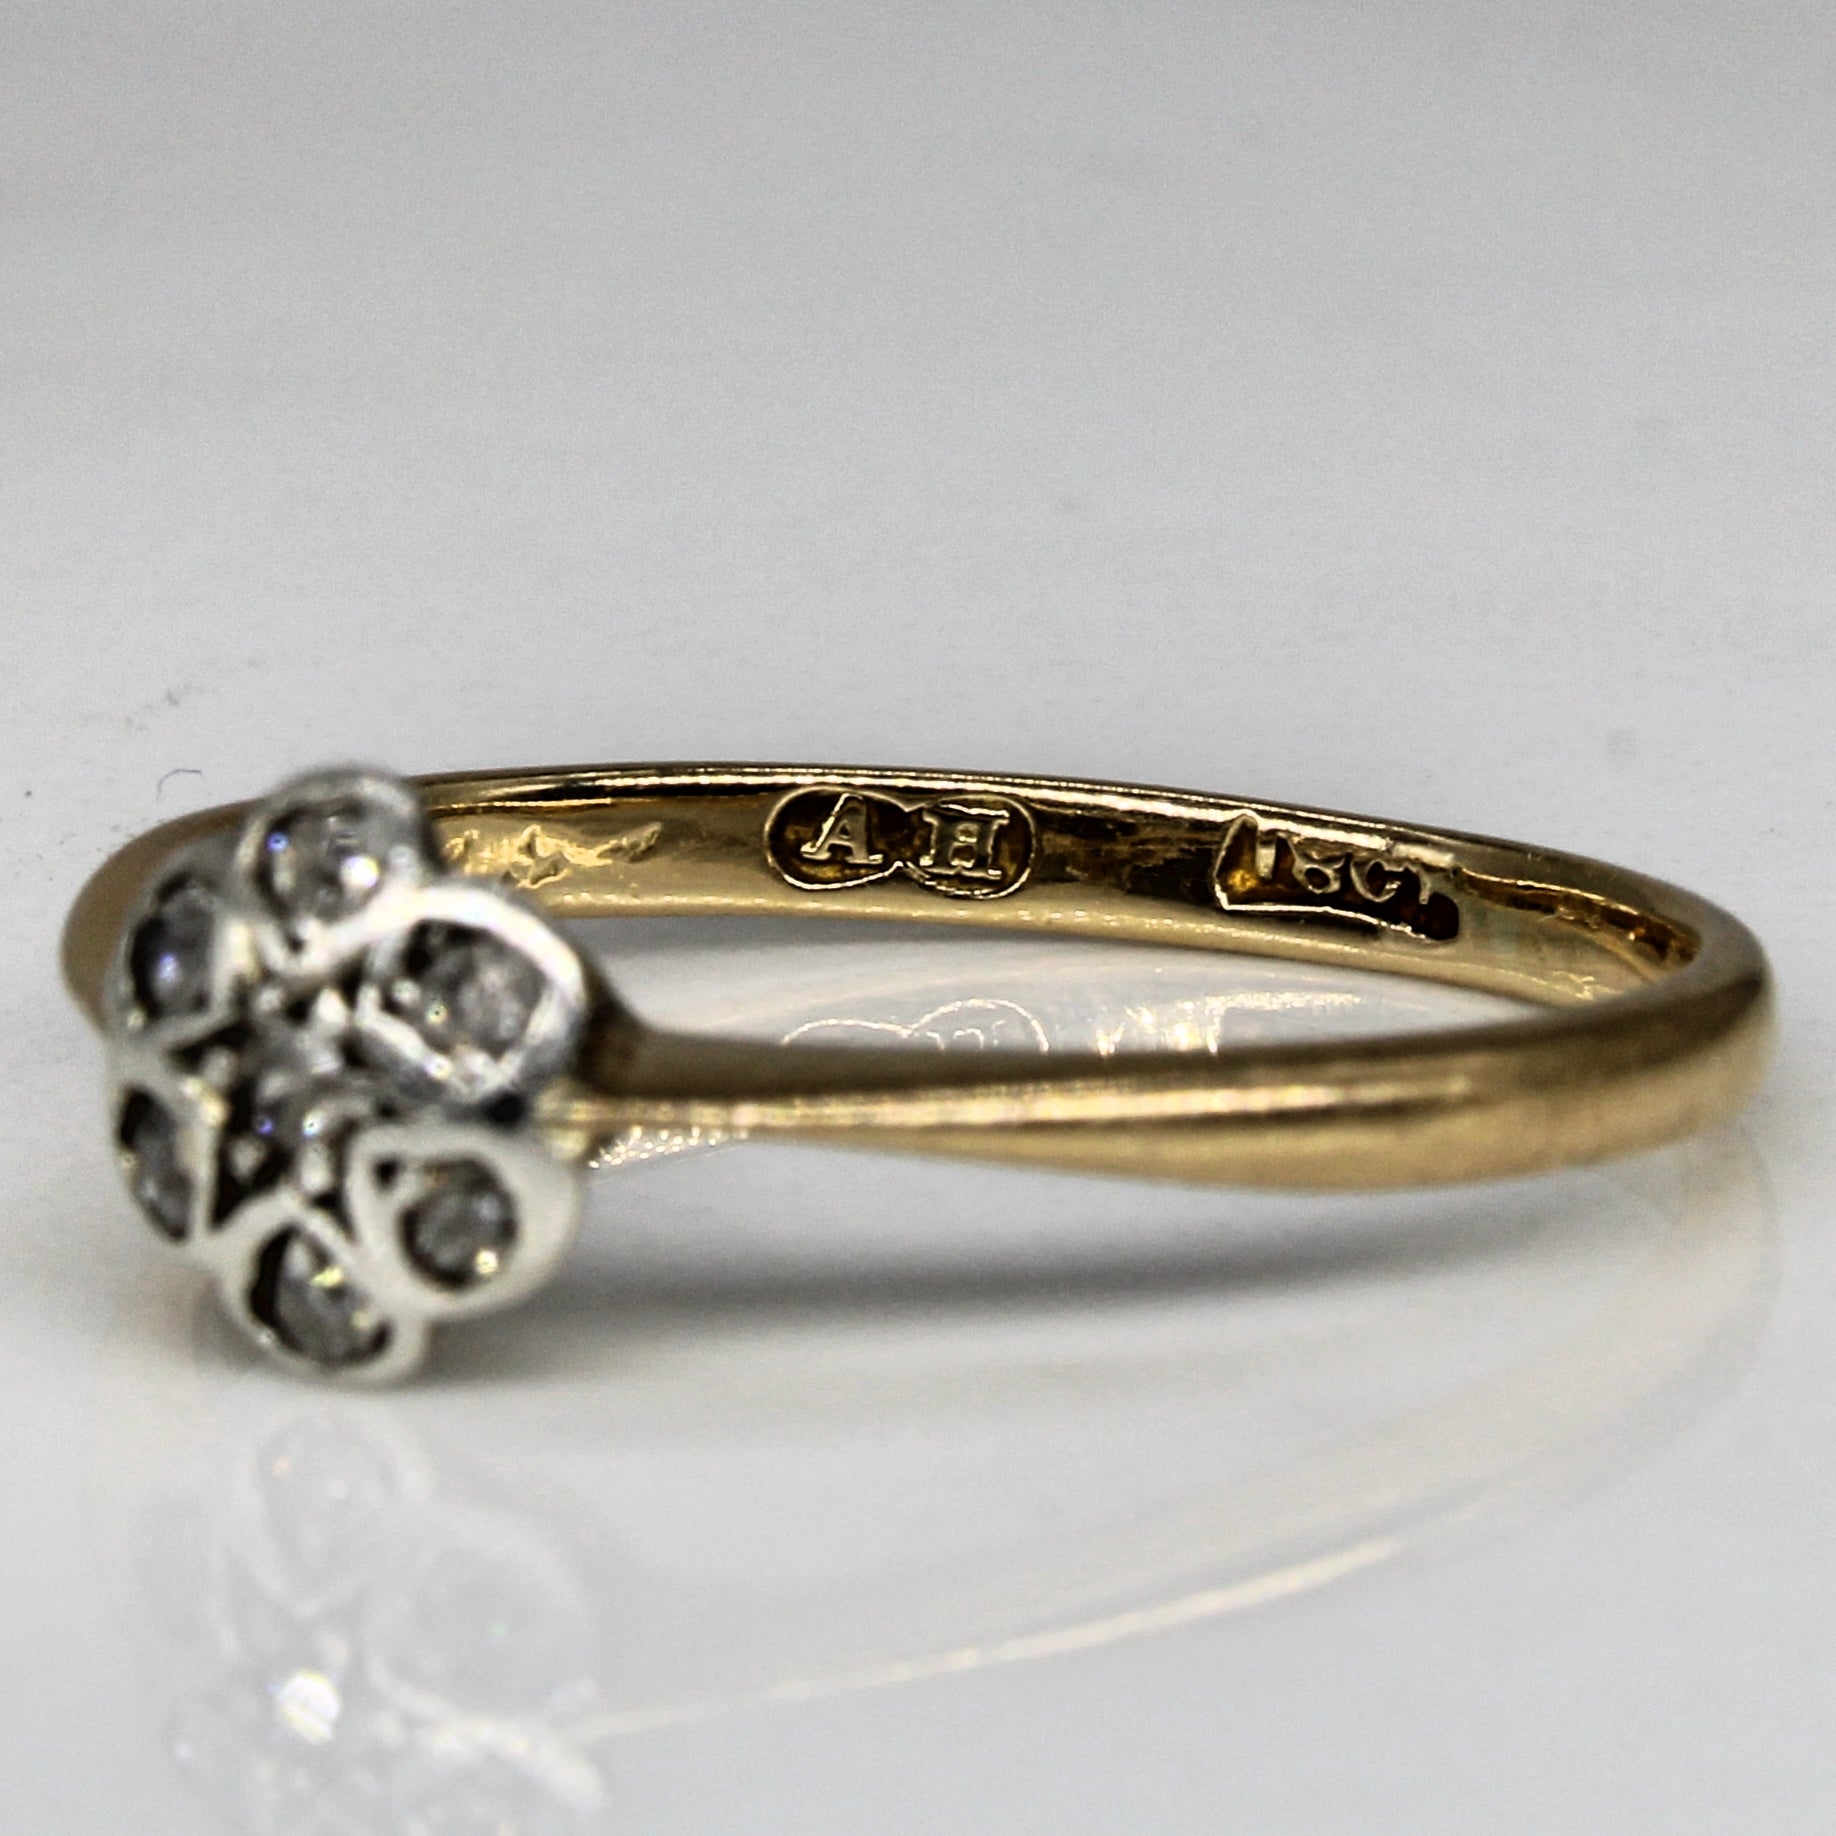 Early 1900s Diamond Cluster Ring | 0.06ctw | SZ 6 |